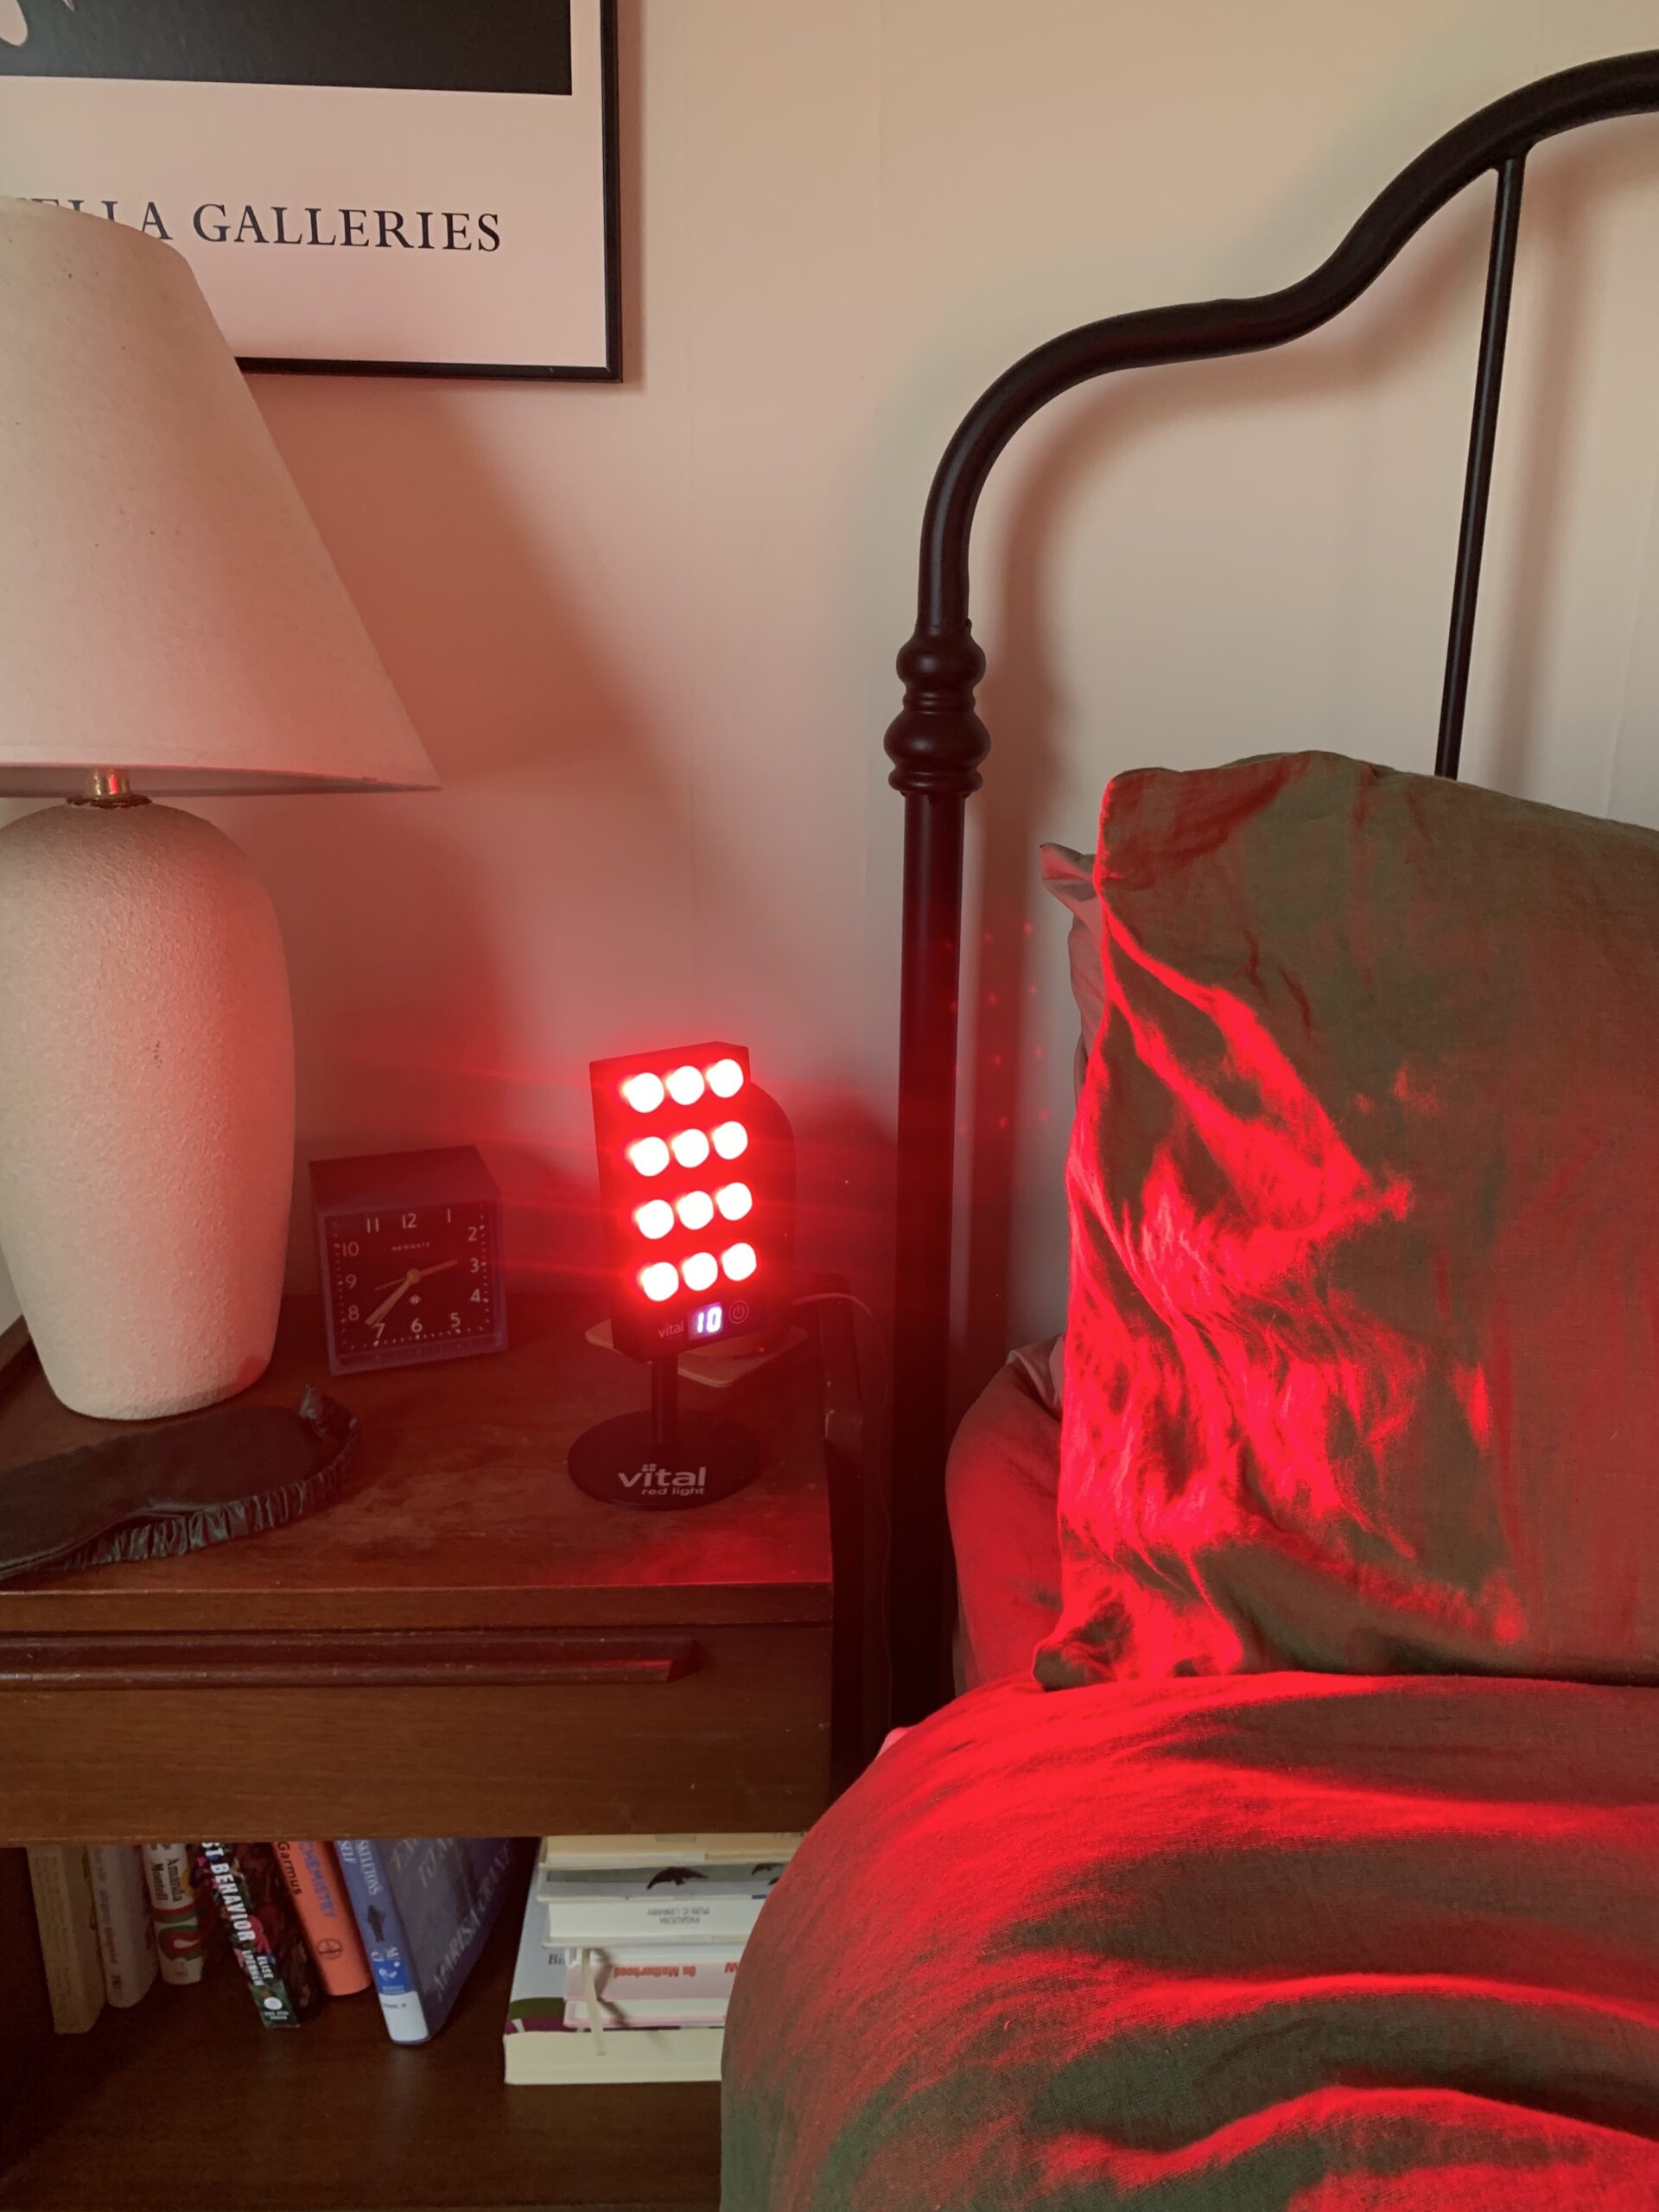 The Benefits Of Red Light Therapy Devices—A Vital Red Light Review